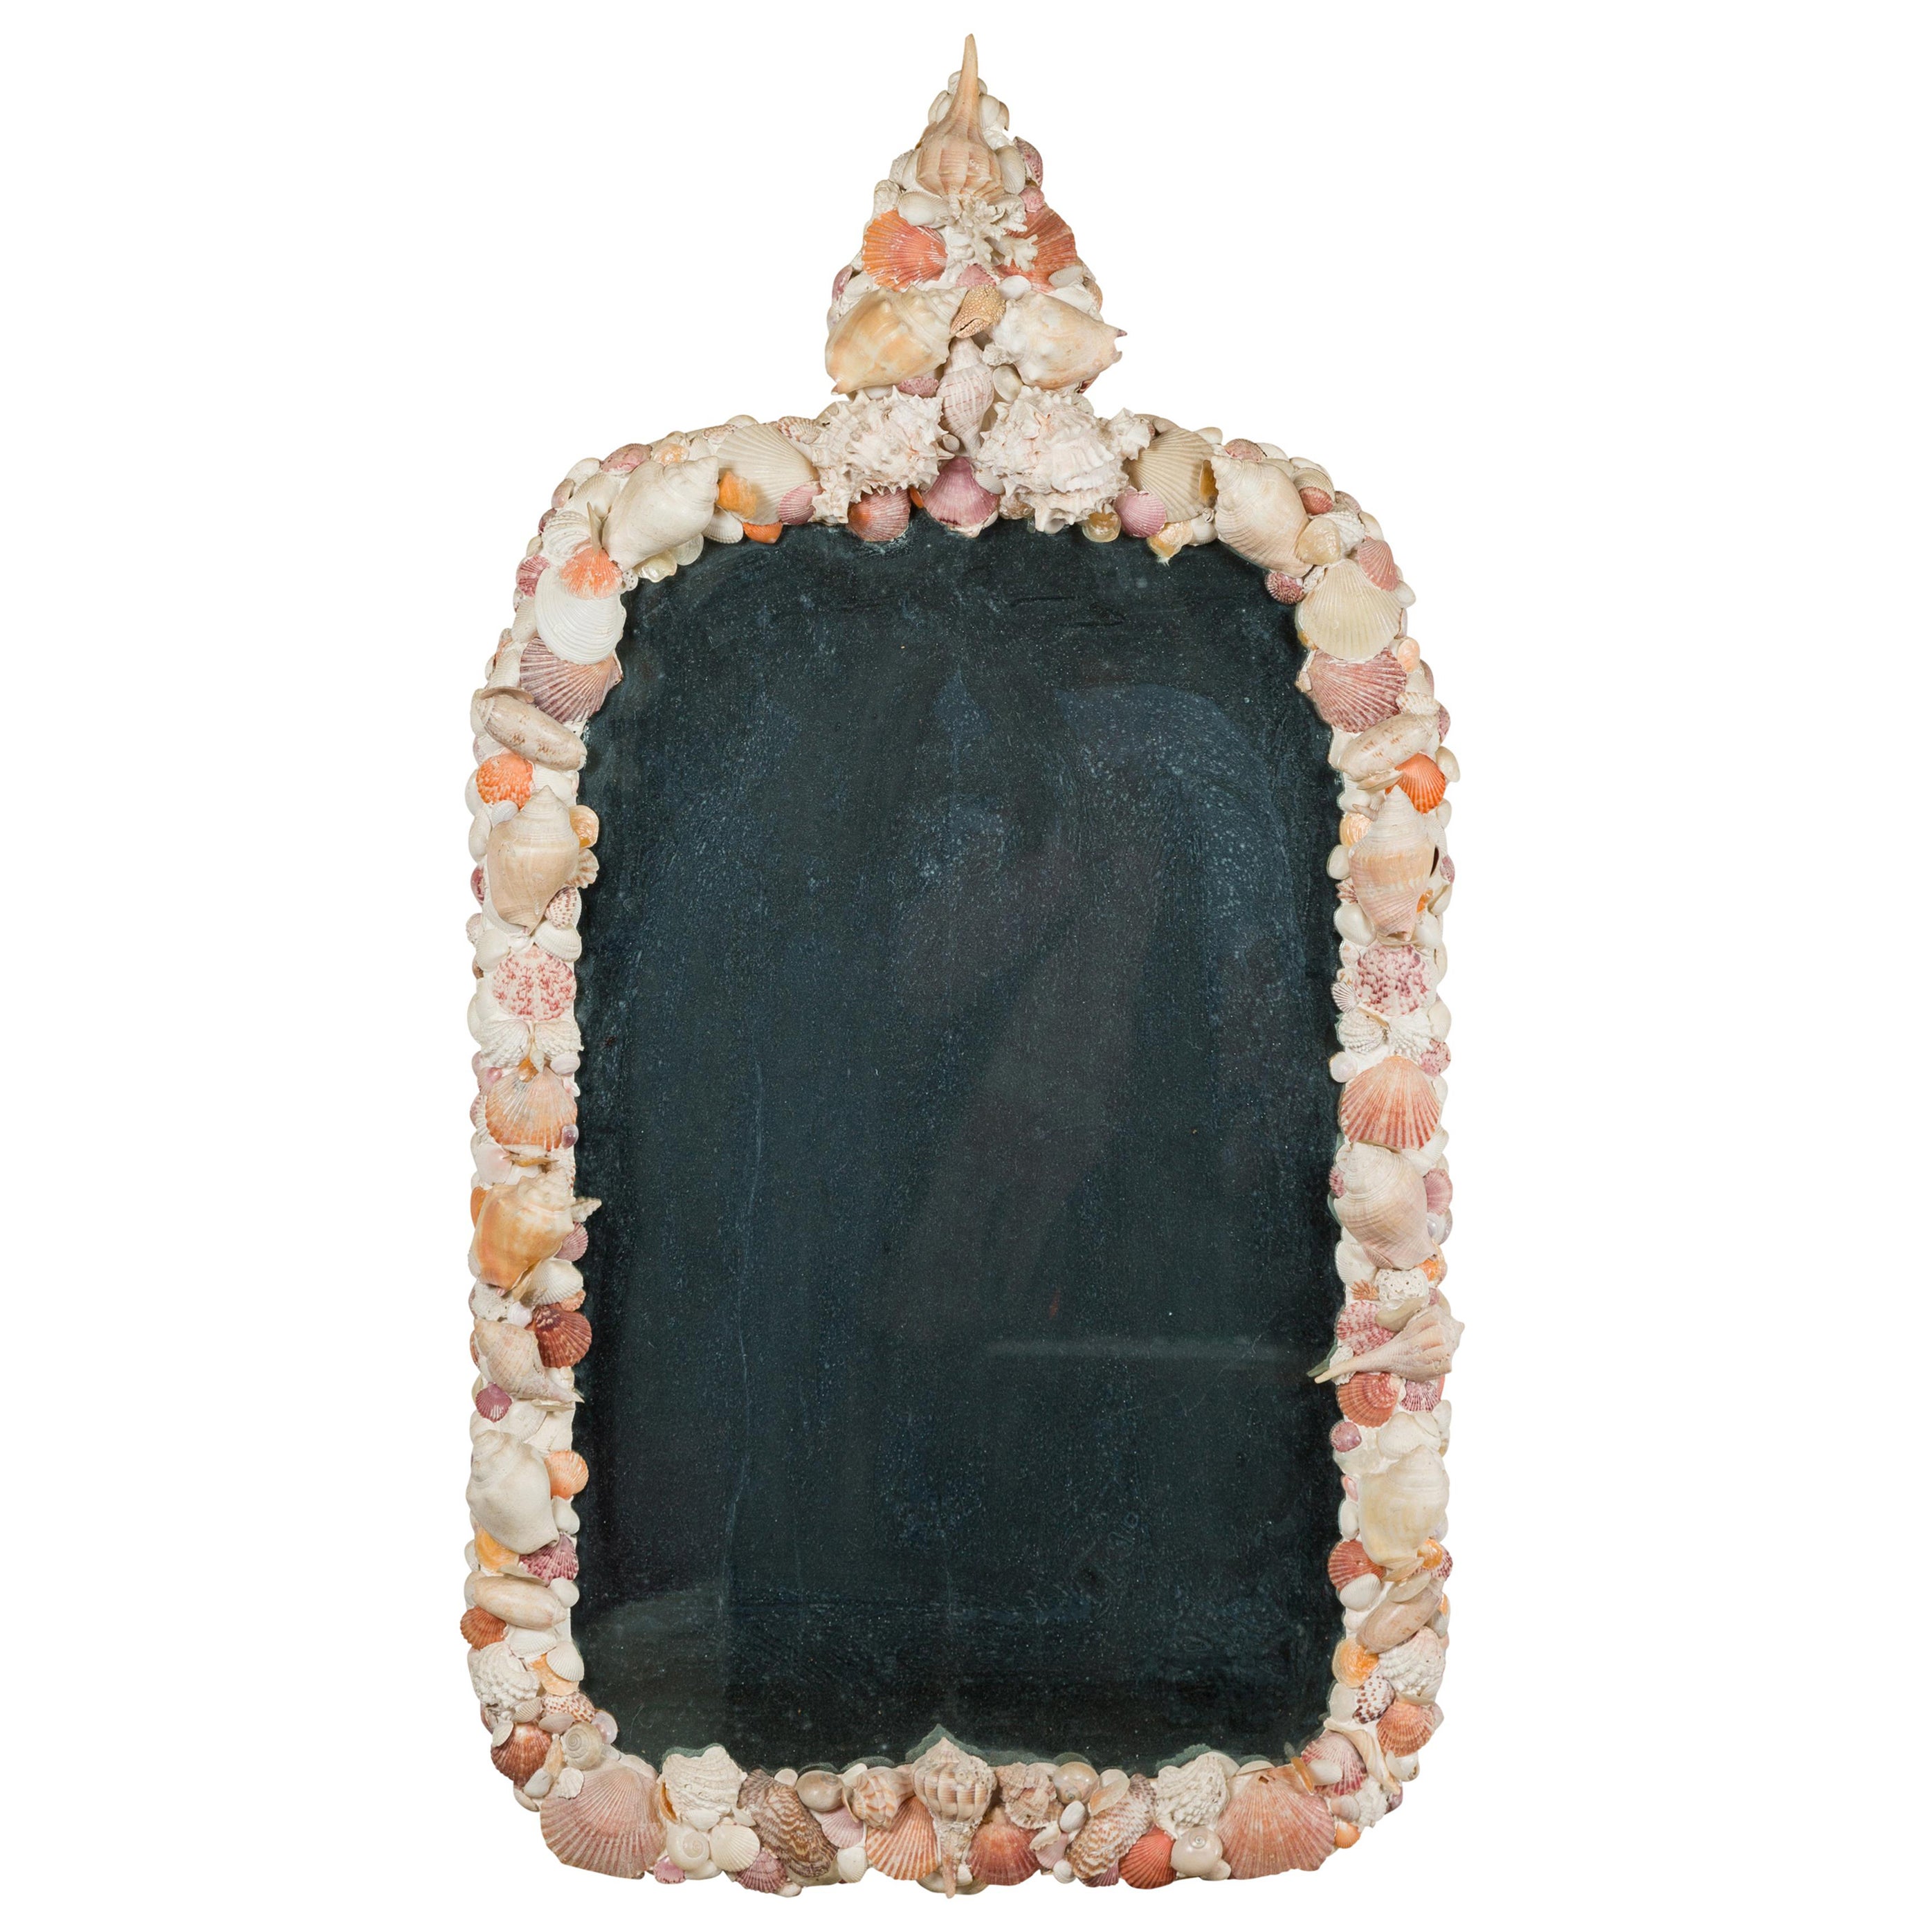 American 1930s Shell Mirror with Pyramidal Crest and Pastel Tones